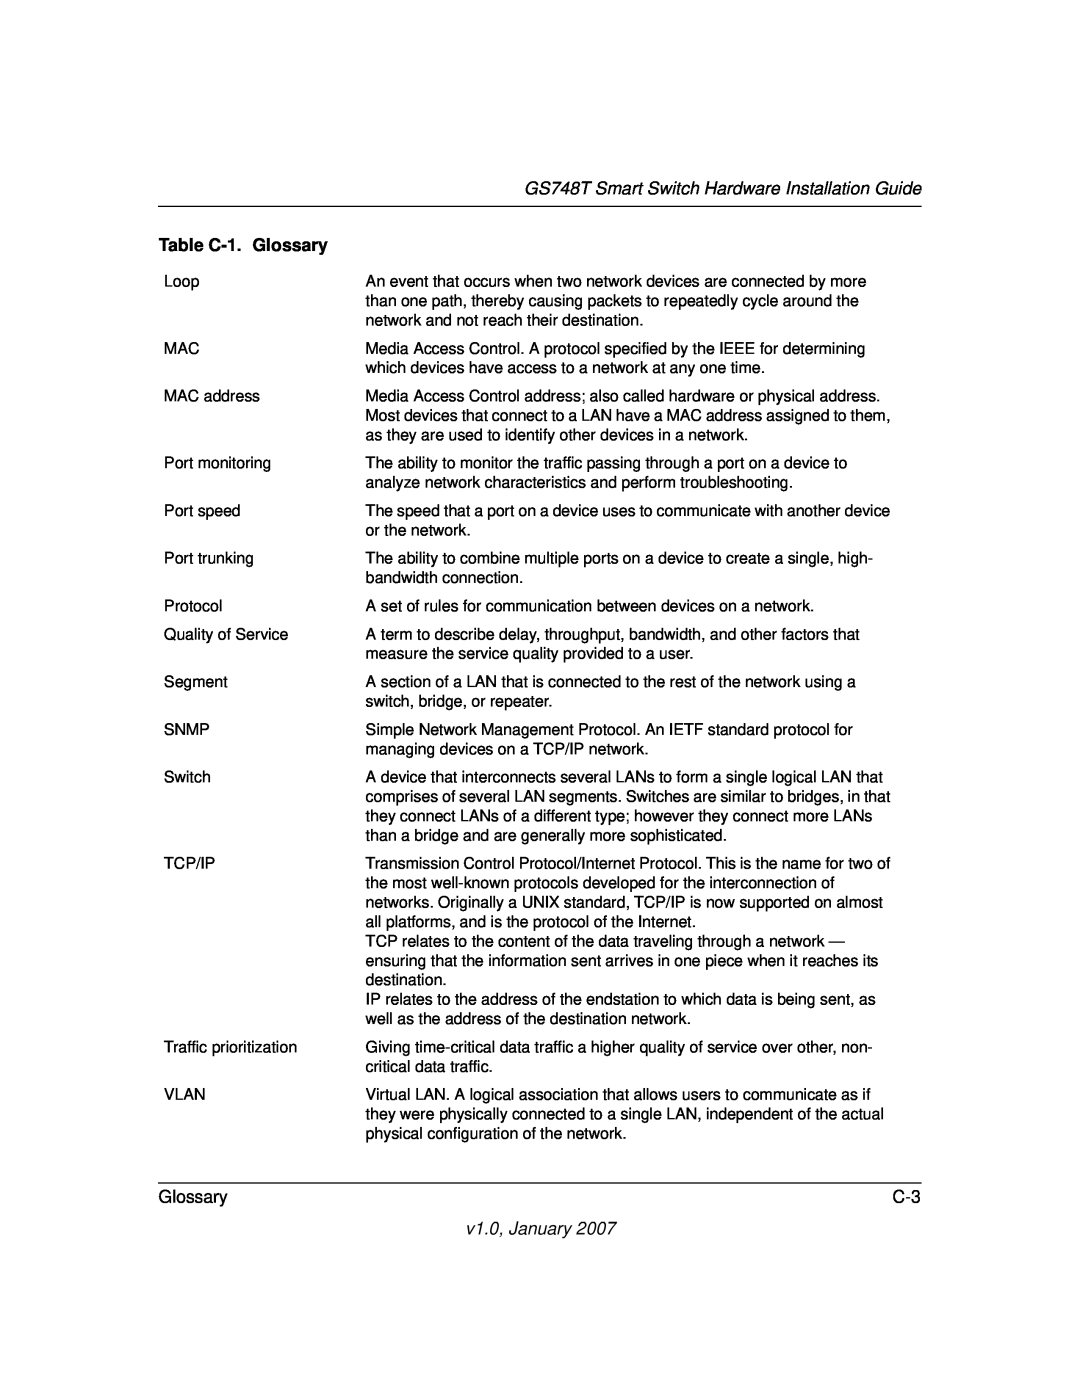 NETGEAR manual GS748T Smart Switch Hardware Installation Guide, Table C-1. Glossary, v1.0, January, Loop 